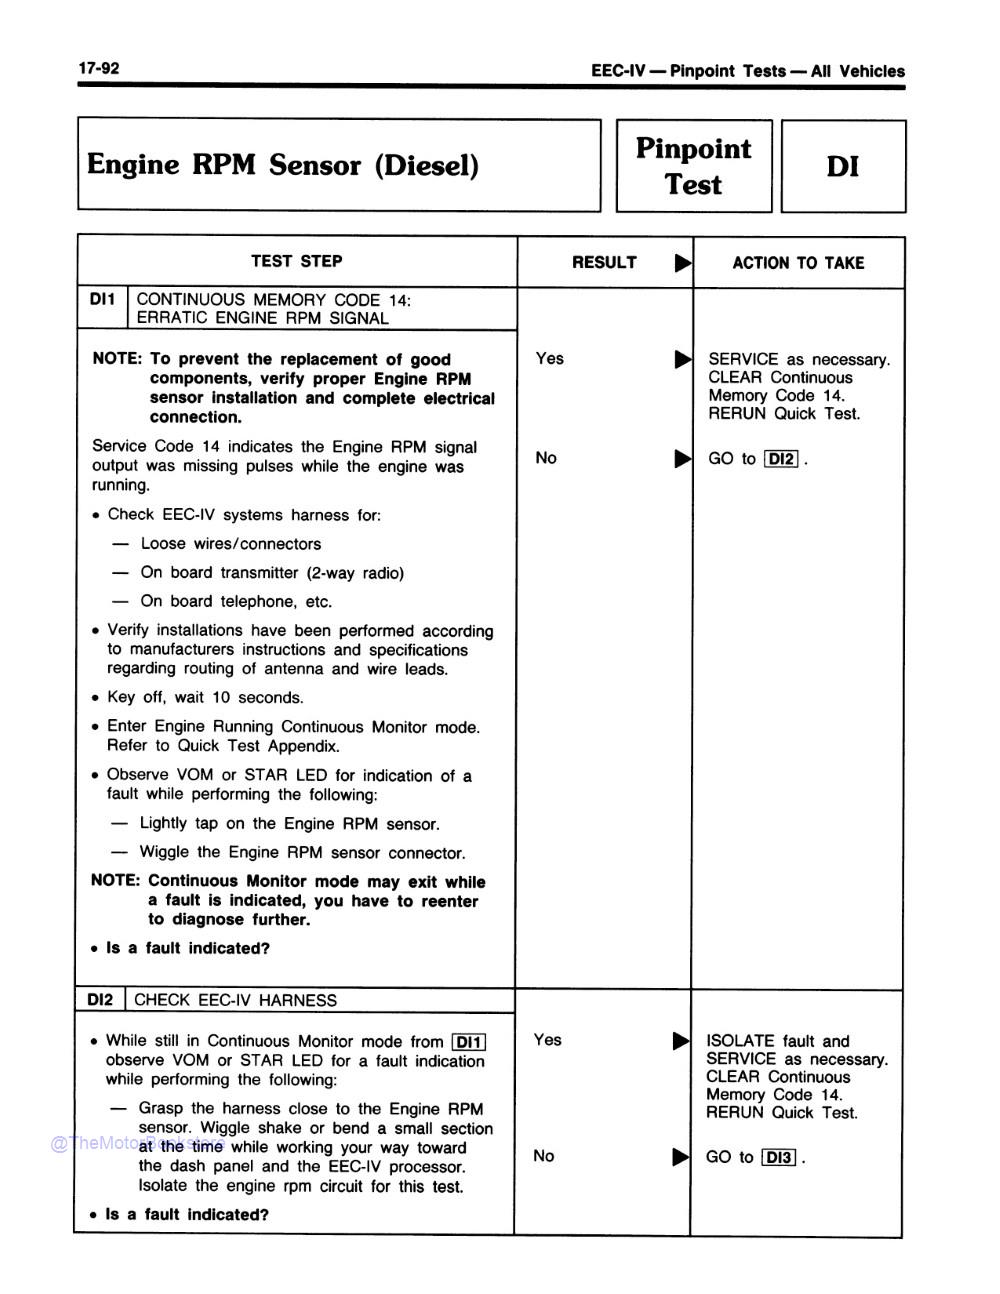 1989 Ford Car / Truck Emissions Diagnosis Shop Manual - Sample Page 1